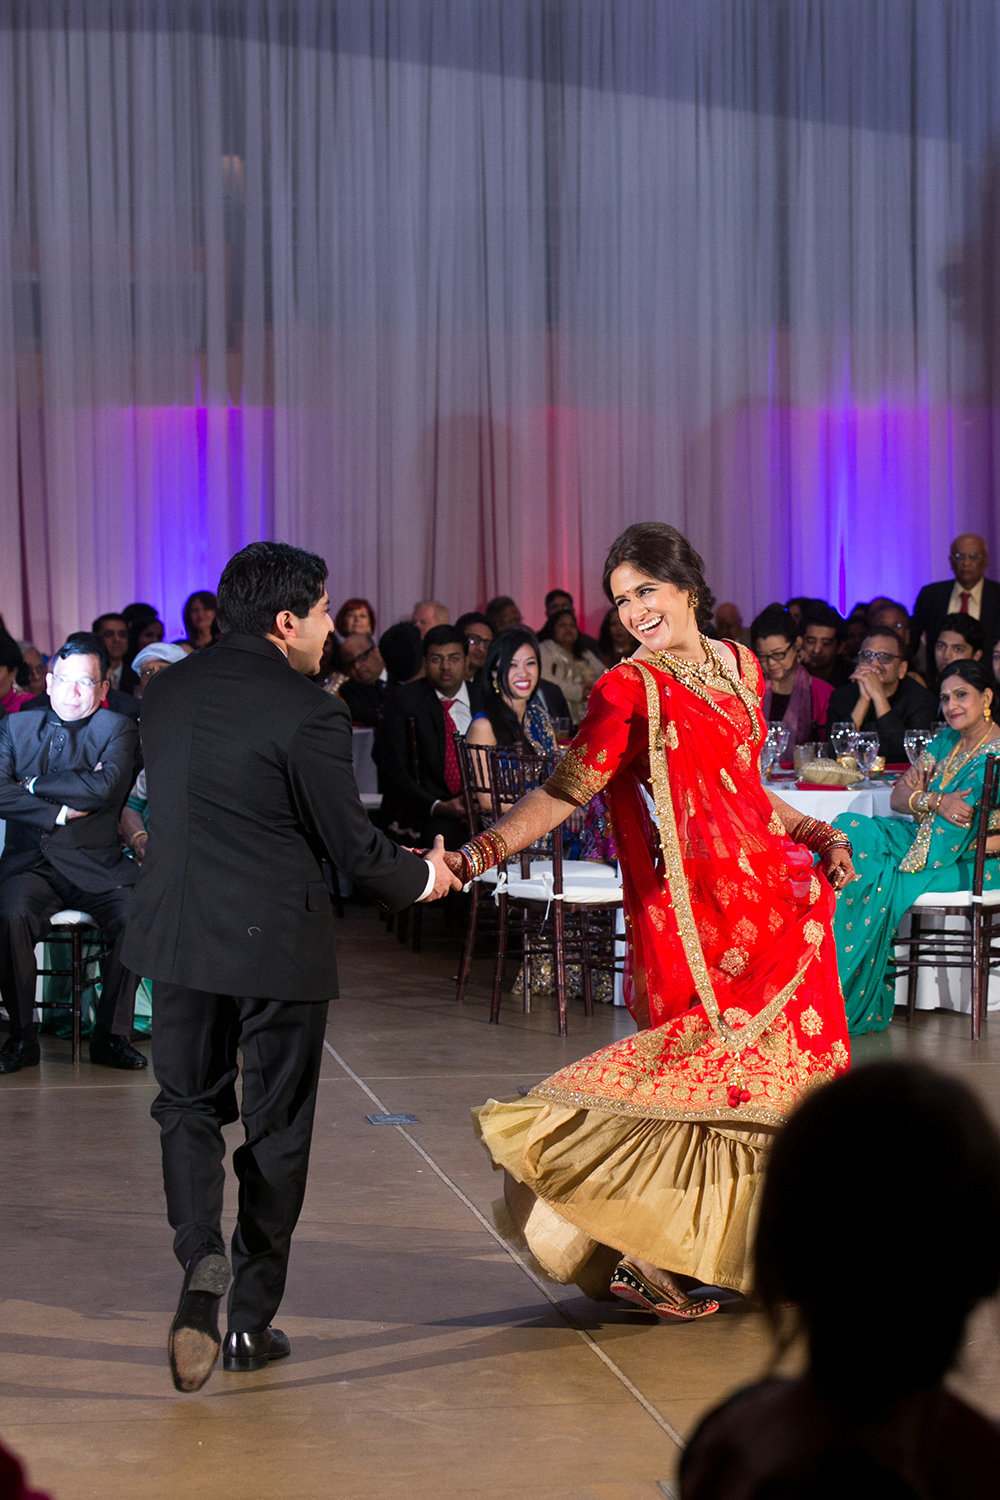 The first dance for a newlywed Indian couple